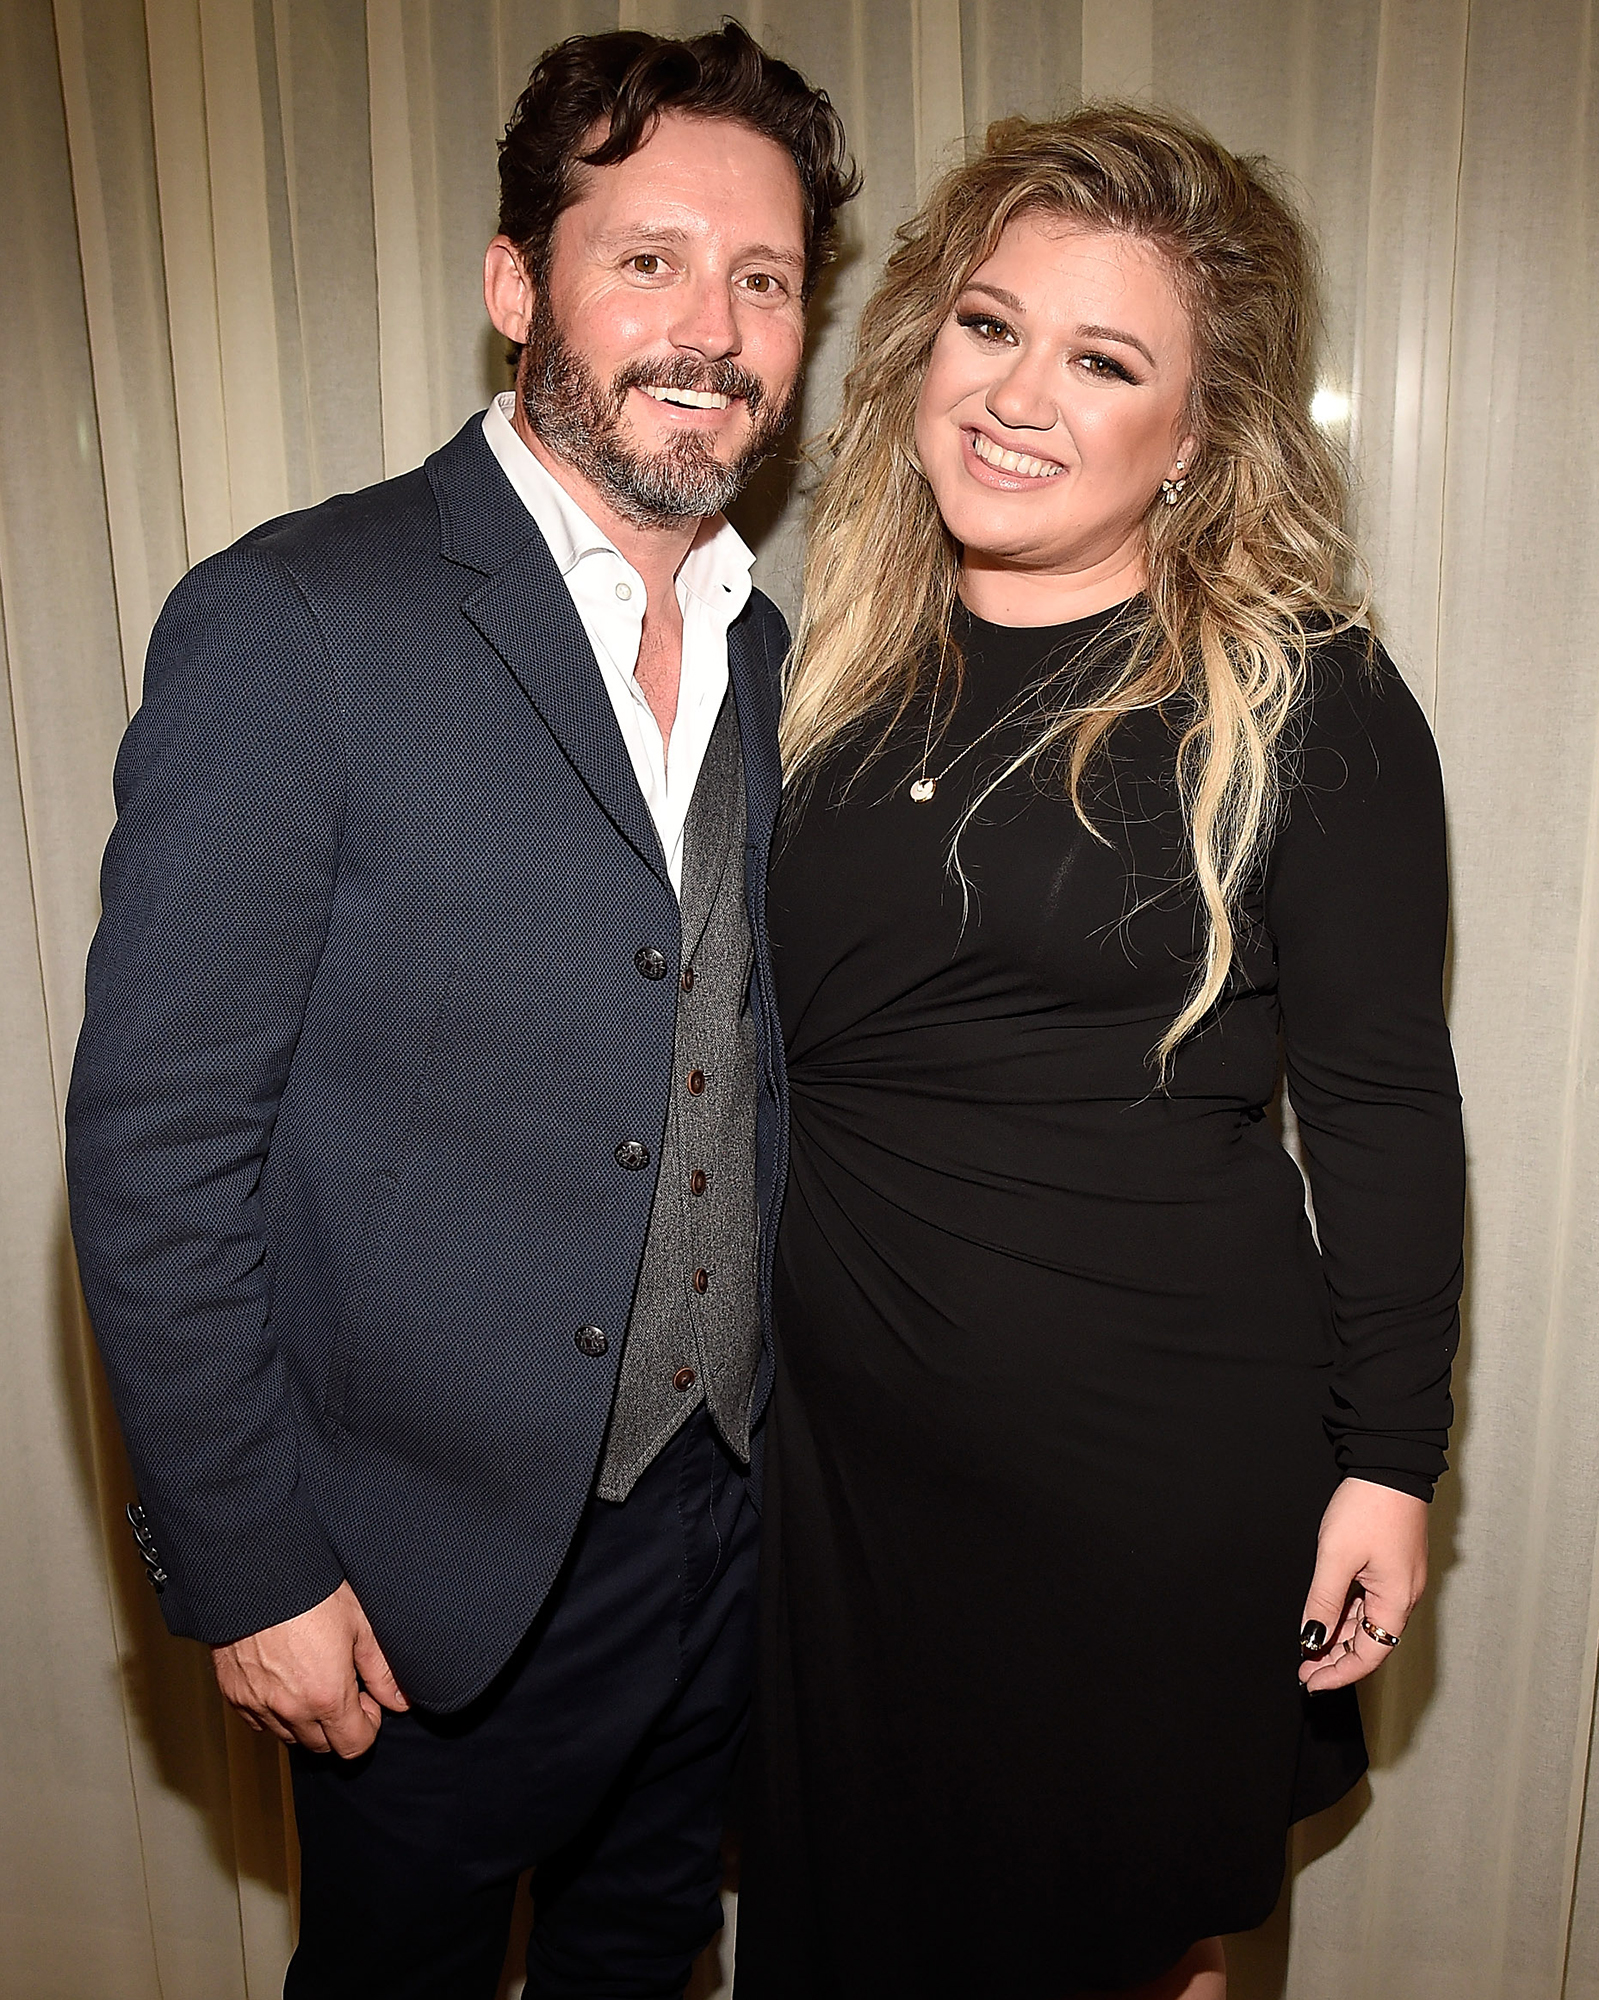 Kelly Clarkson Says She ‘Never Wanted to Get Married’ to Brandon Blackstock